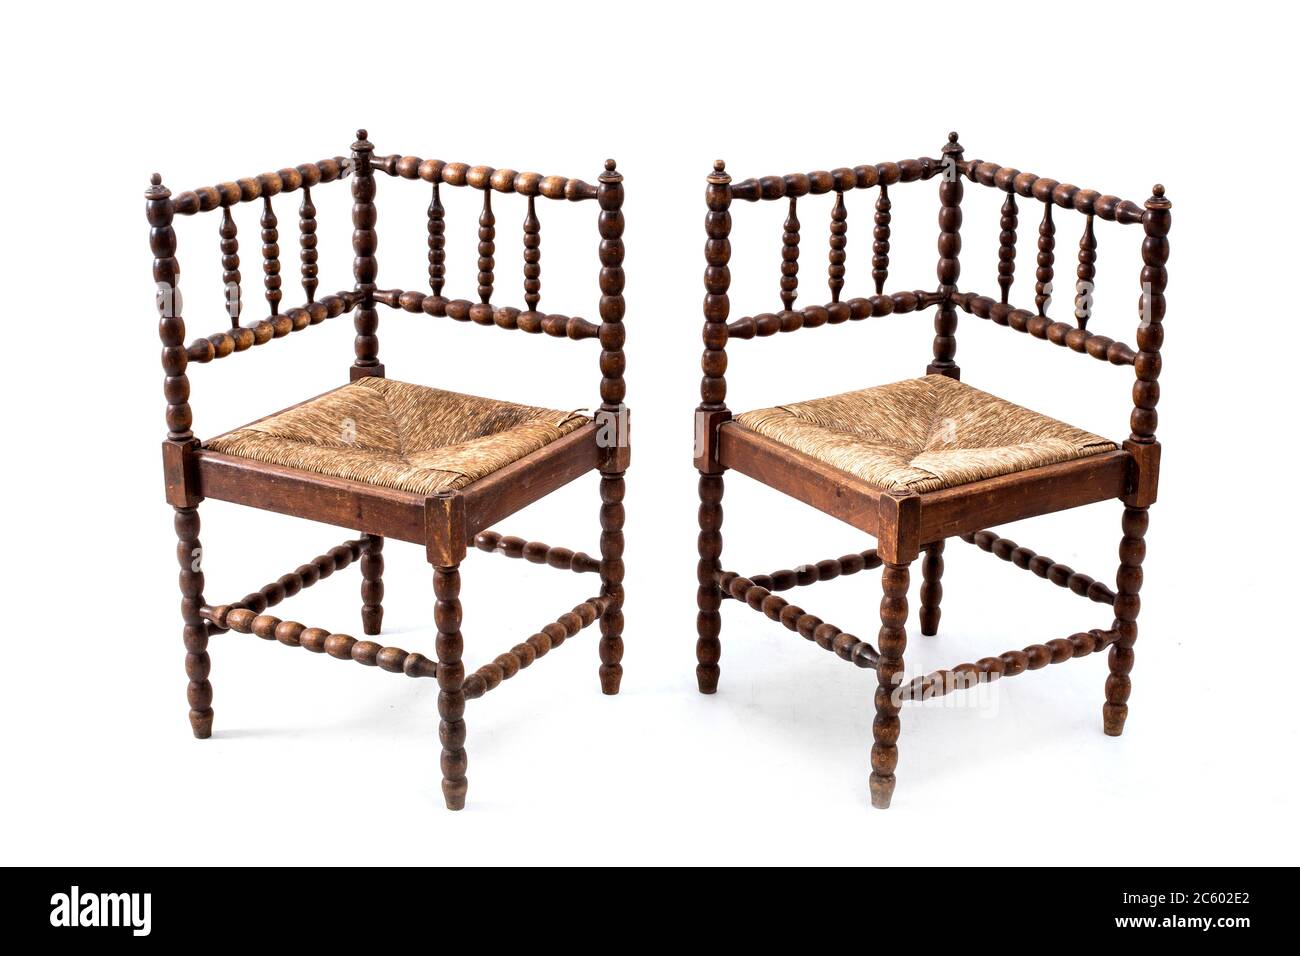 Pair of old fashioned wood armchairs on the white background. Stock Photo